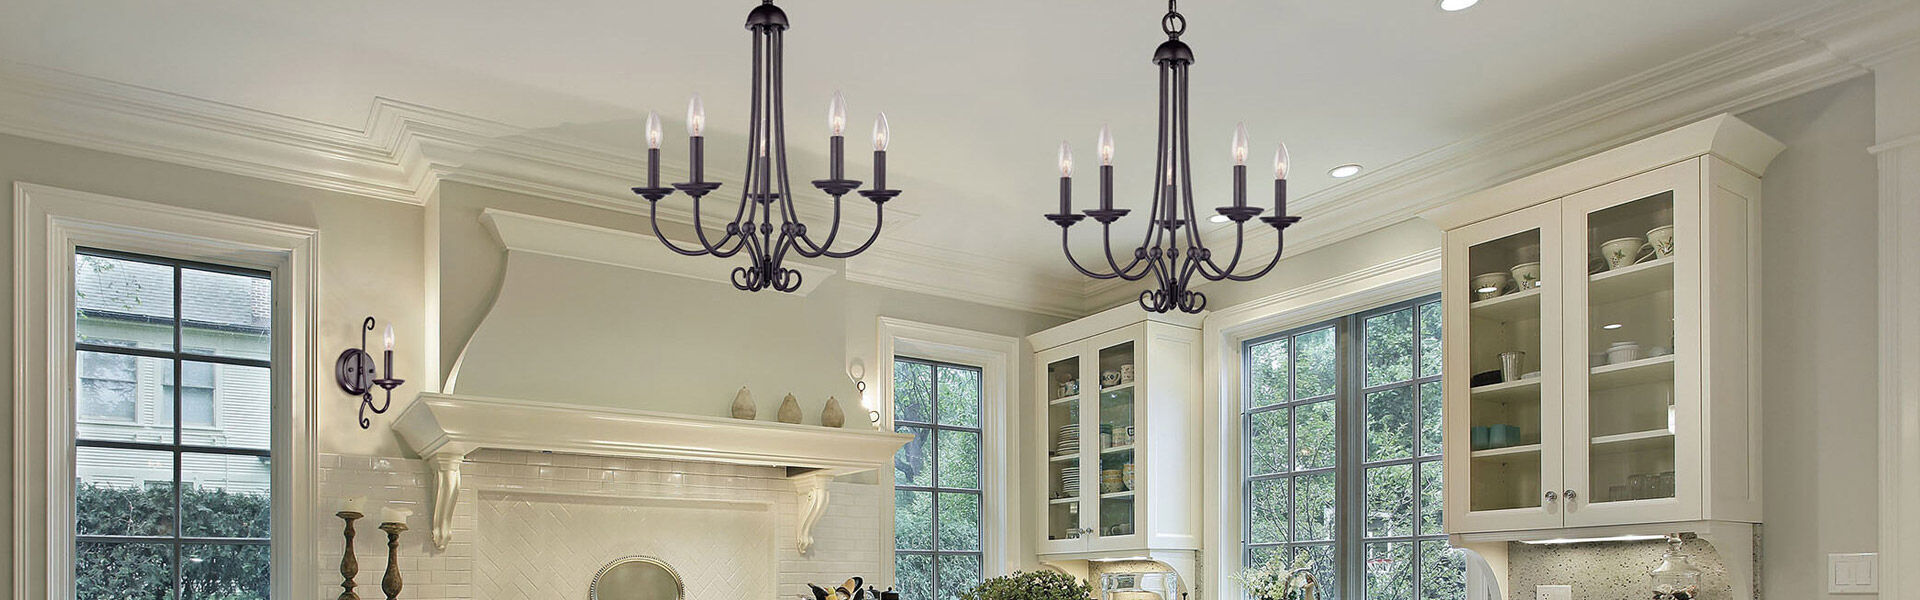 Thomas Lighting | 15% Off Select Designs | ends 6.16